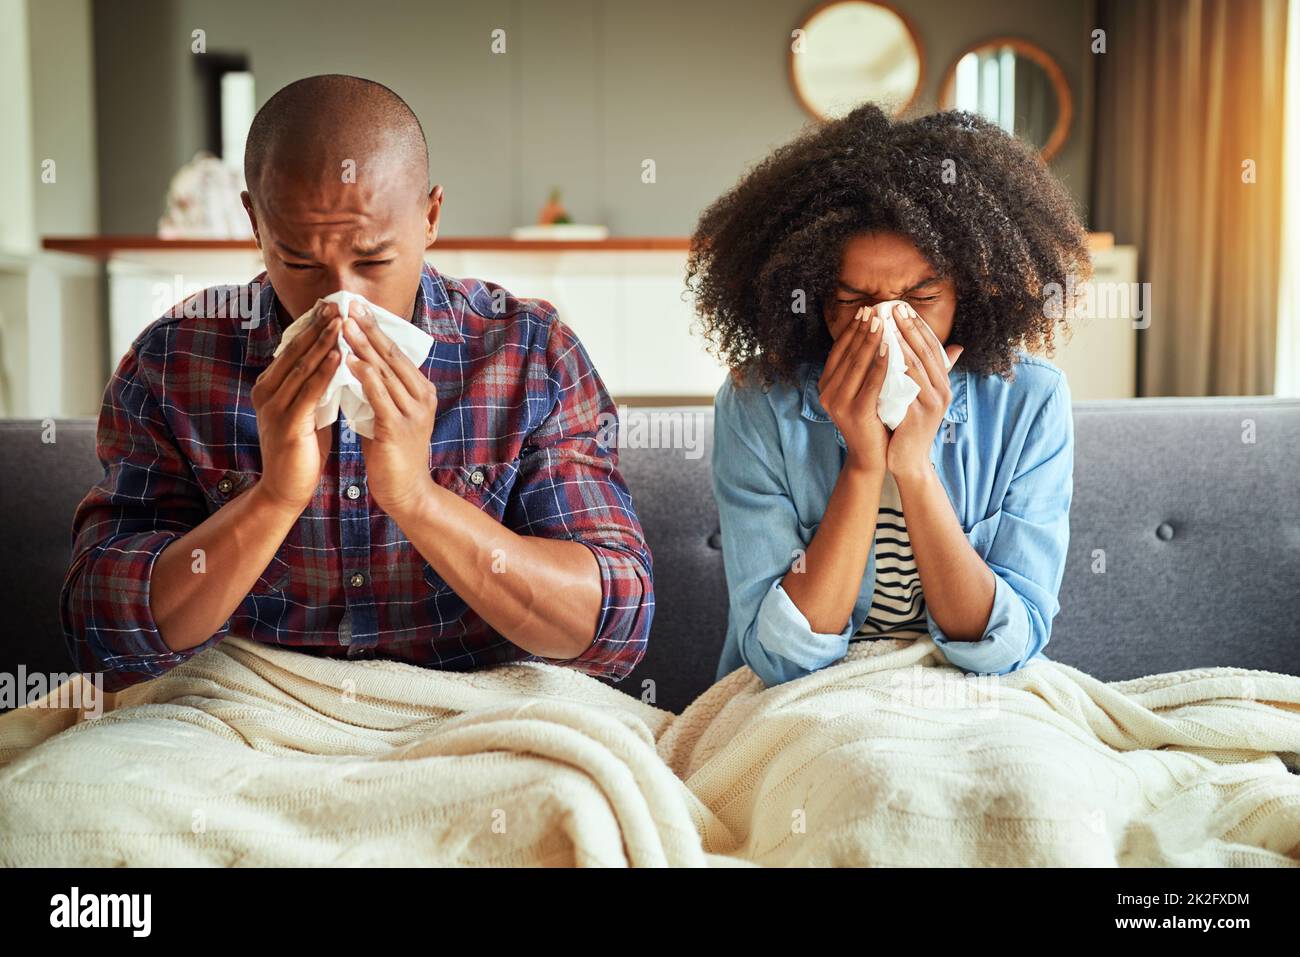 How did we both get sick. Shot of a tired looking young couple seated on a couch with blankets while being sick together at home. Stock Photo